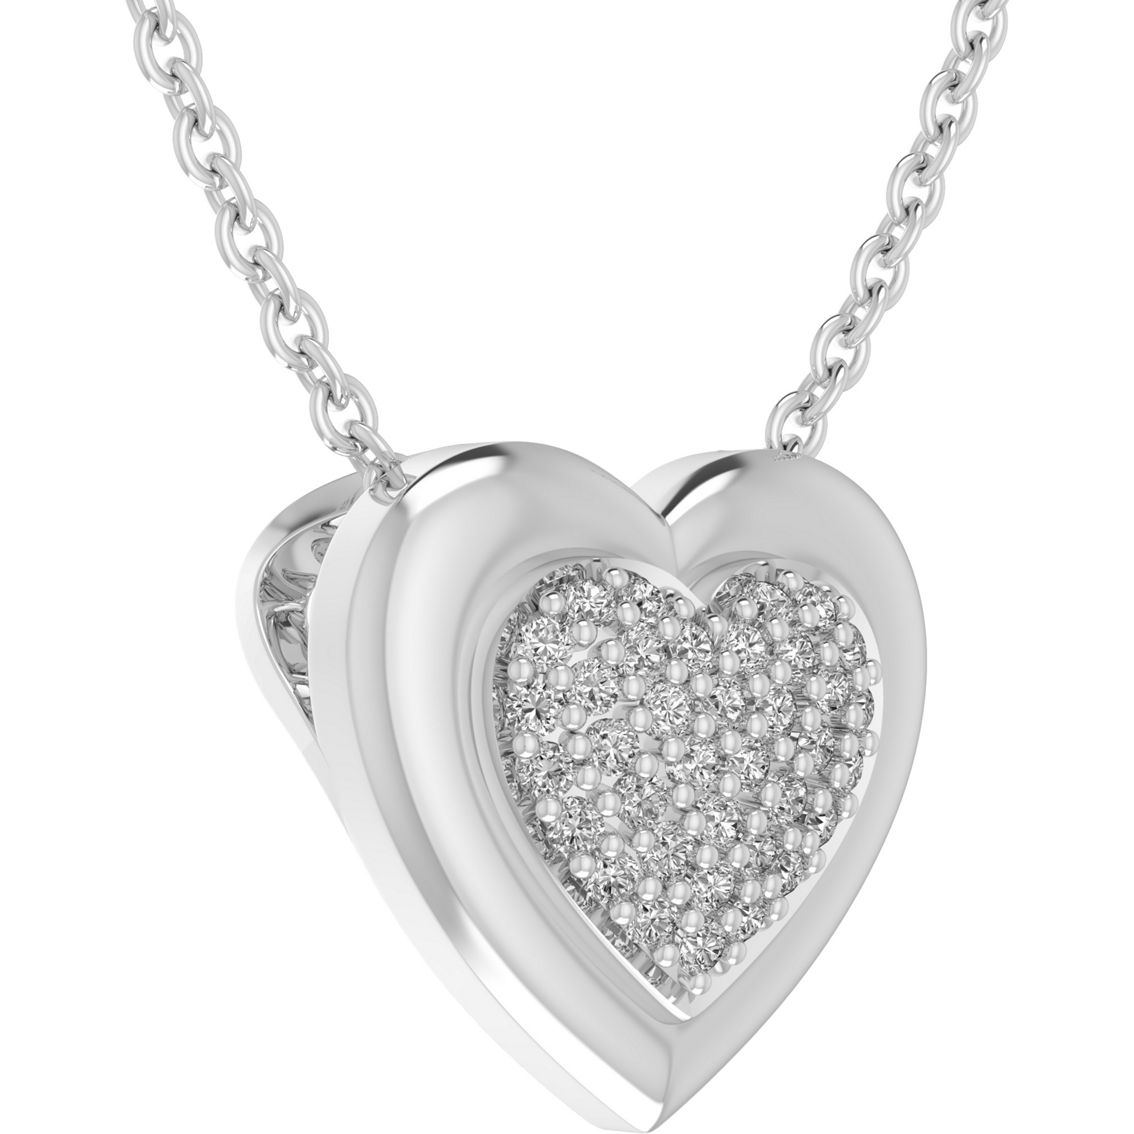 Sterling silver 1/5 CTW Diamond Heart Earrings and Pendant Set - Image 3 of 6